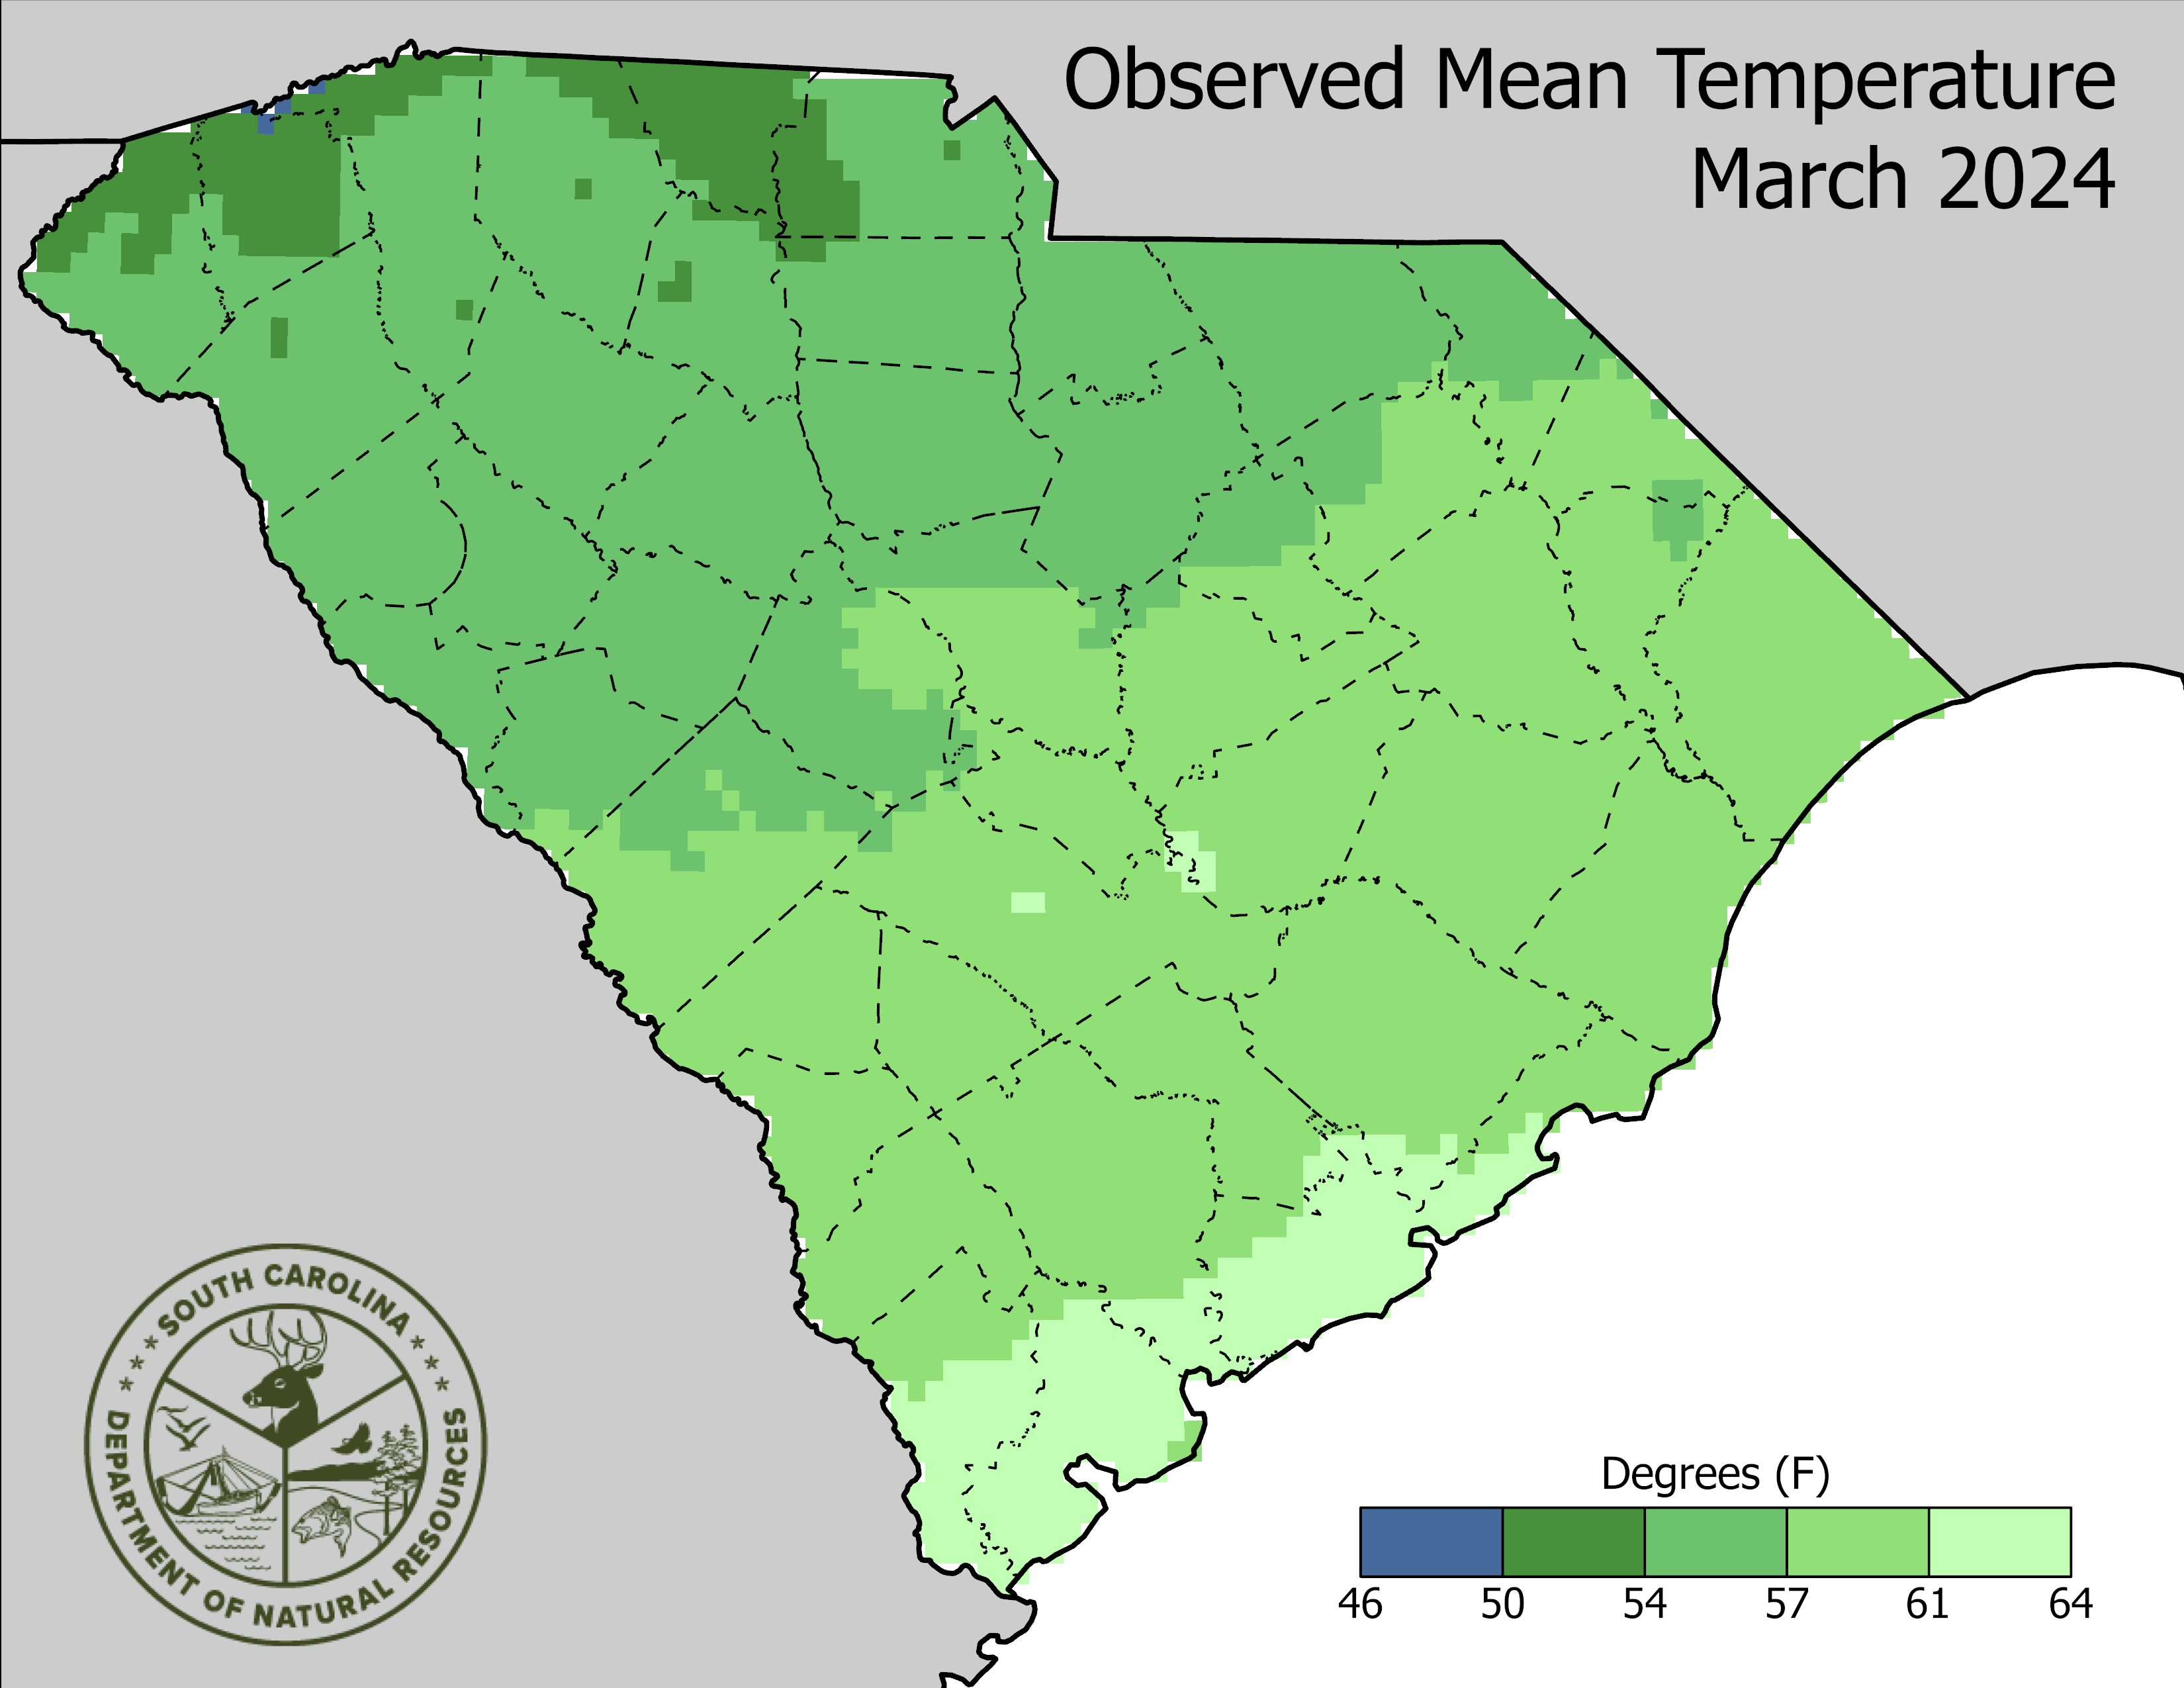 Thumbnail of observed temperature for the previous month.